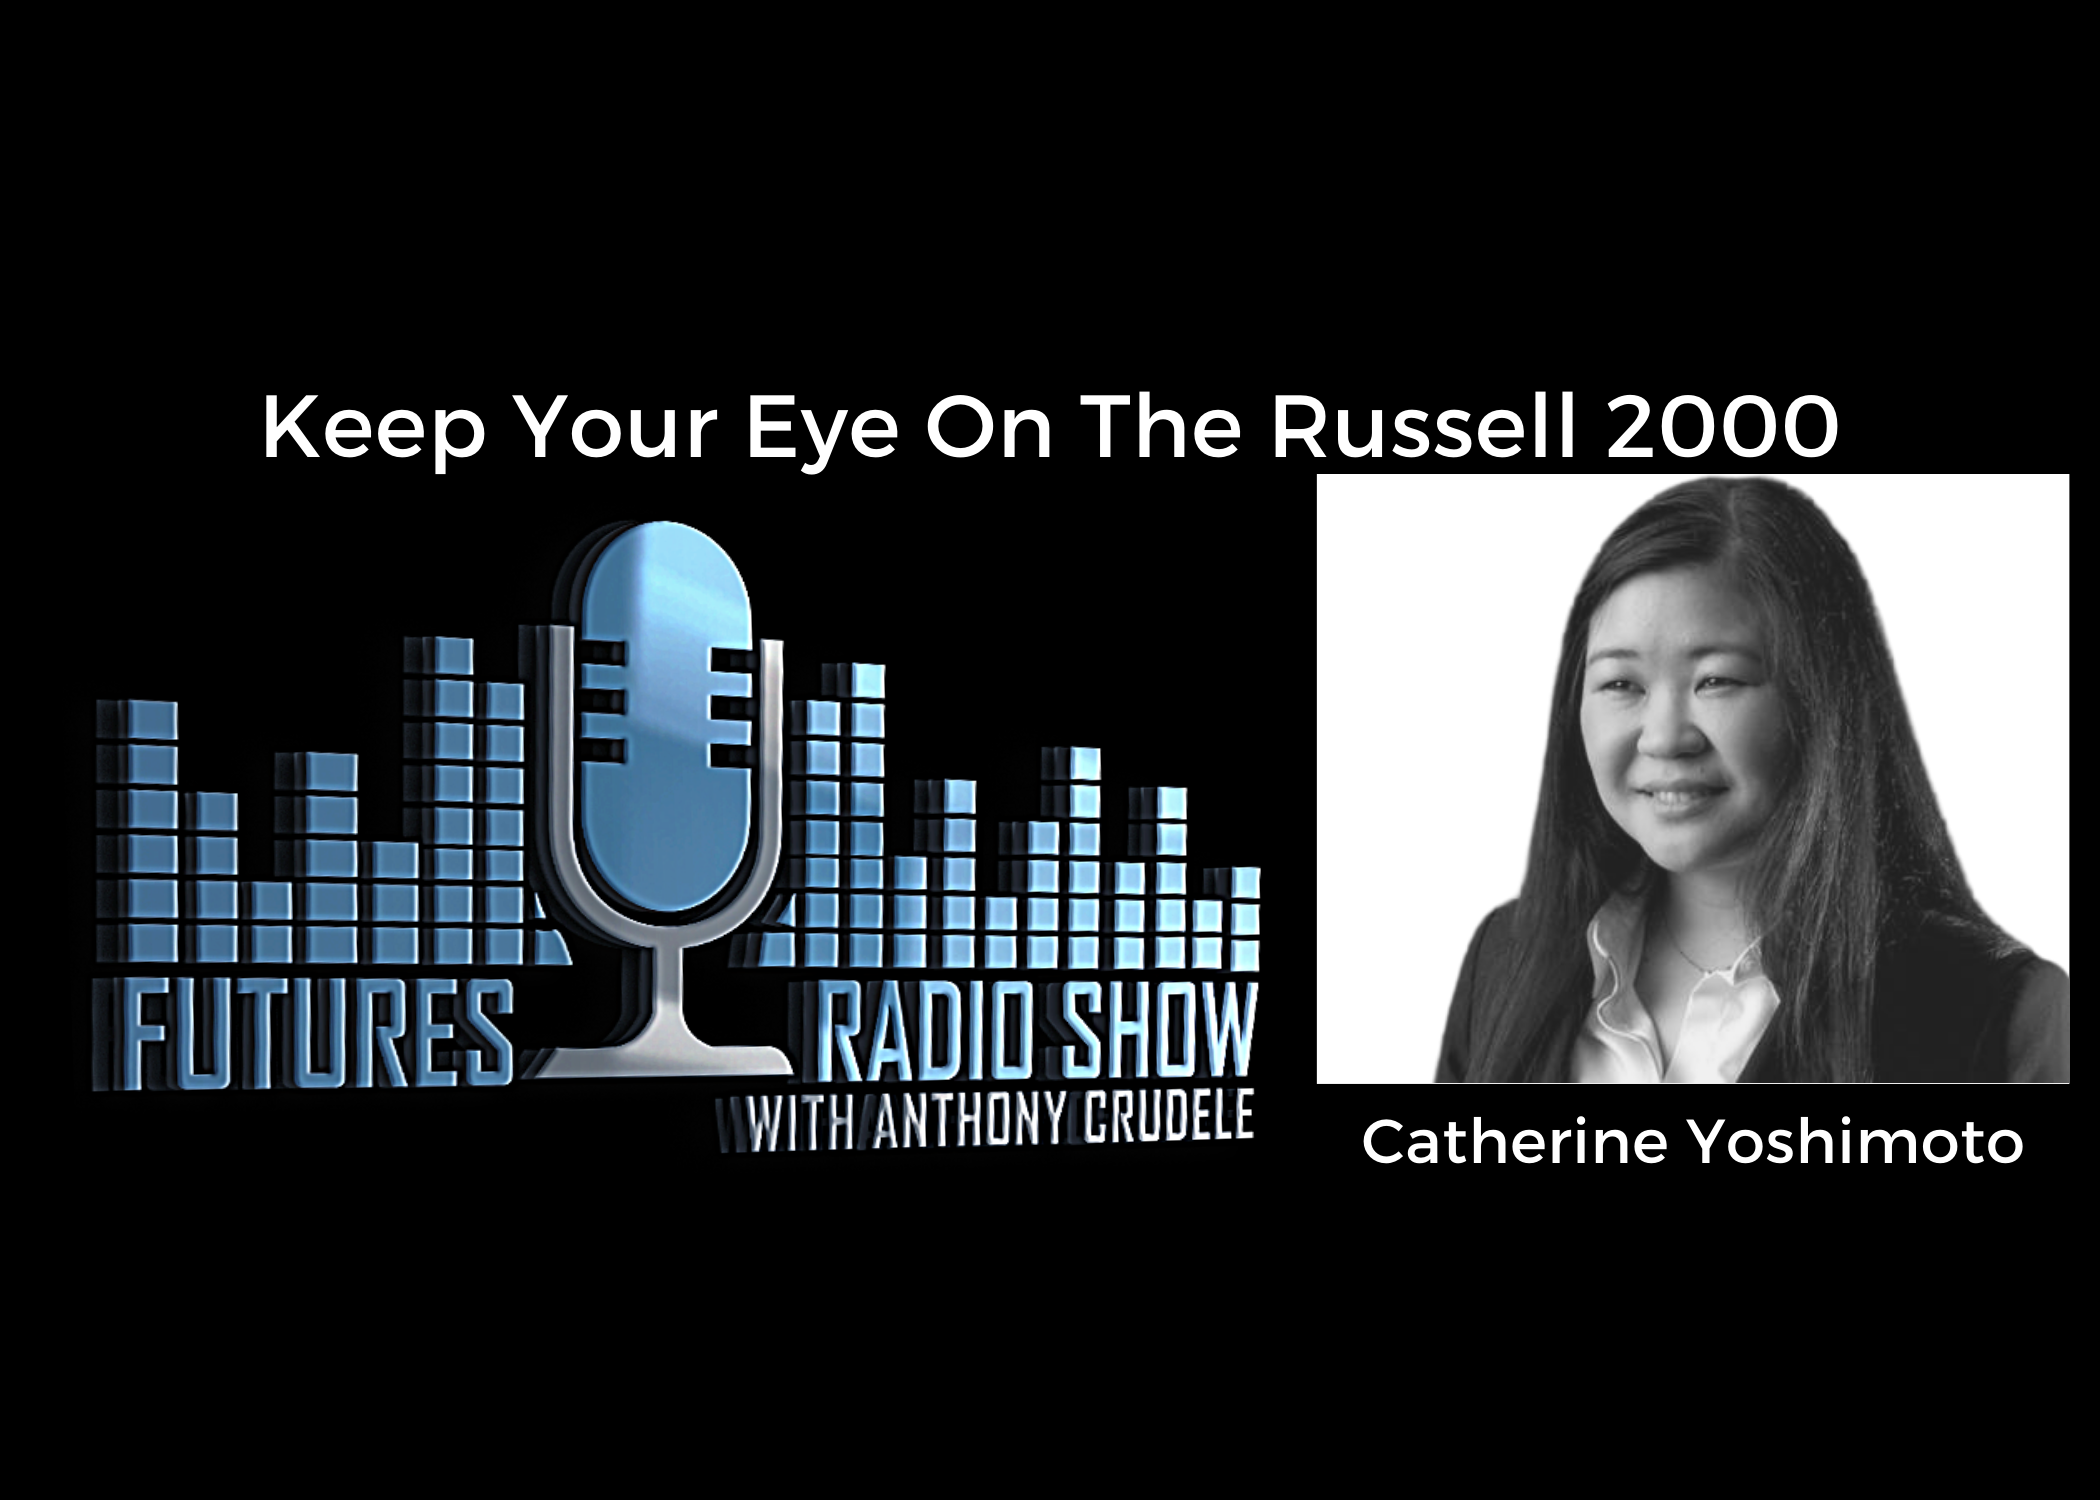 Keep Your Eye On The Russell 2000 – Catherine Yoshimoto